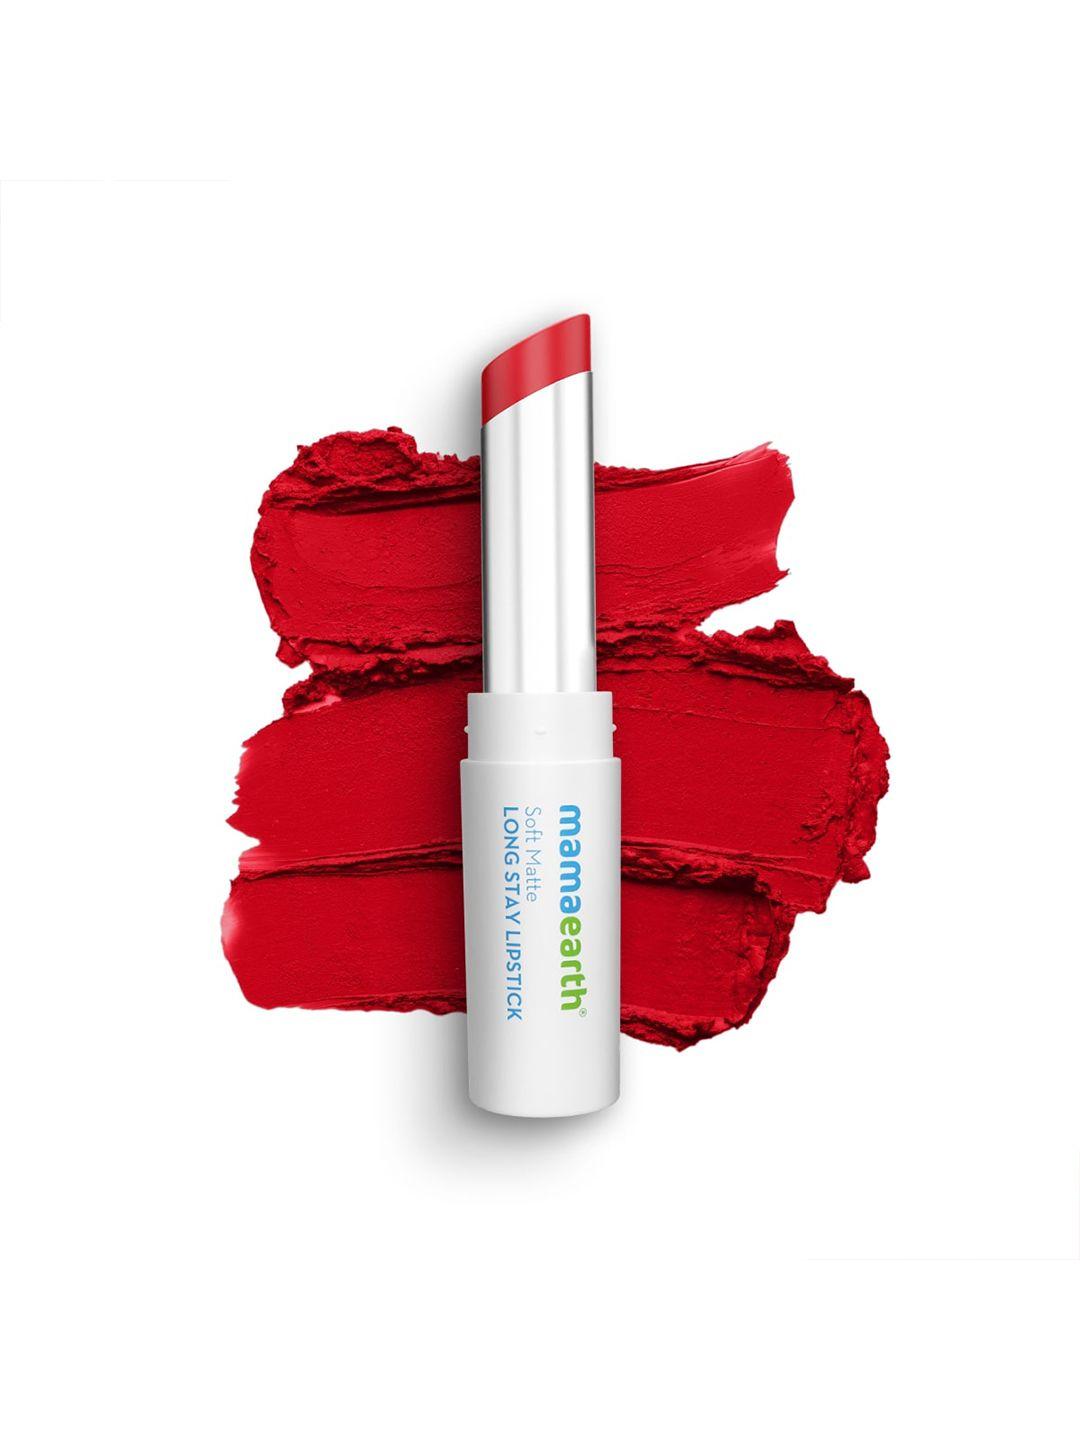 mamaearth soft matte 12hr long stay lipstick with jojoba oil & vitamin e 3.5g- ruby red